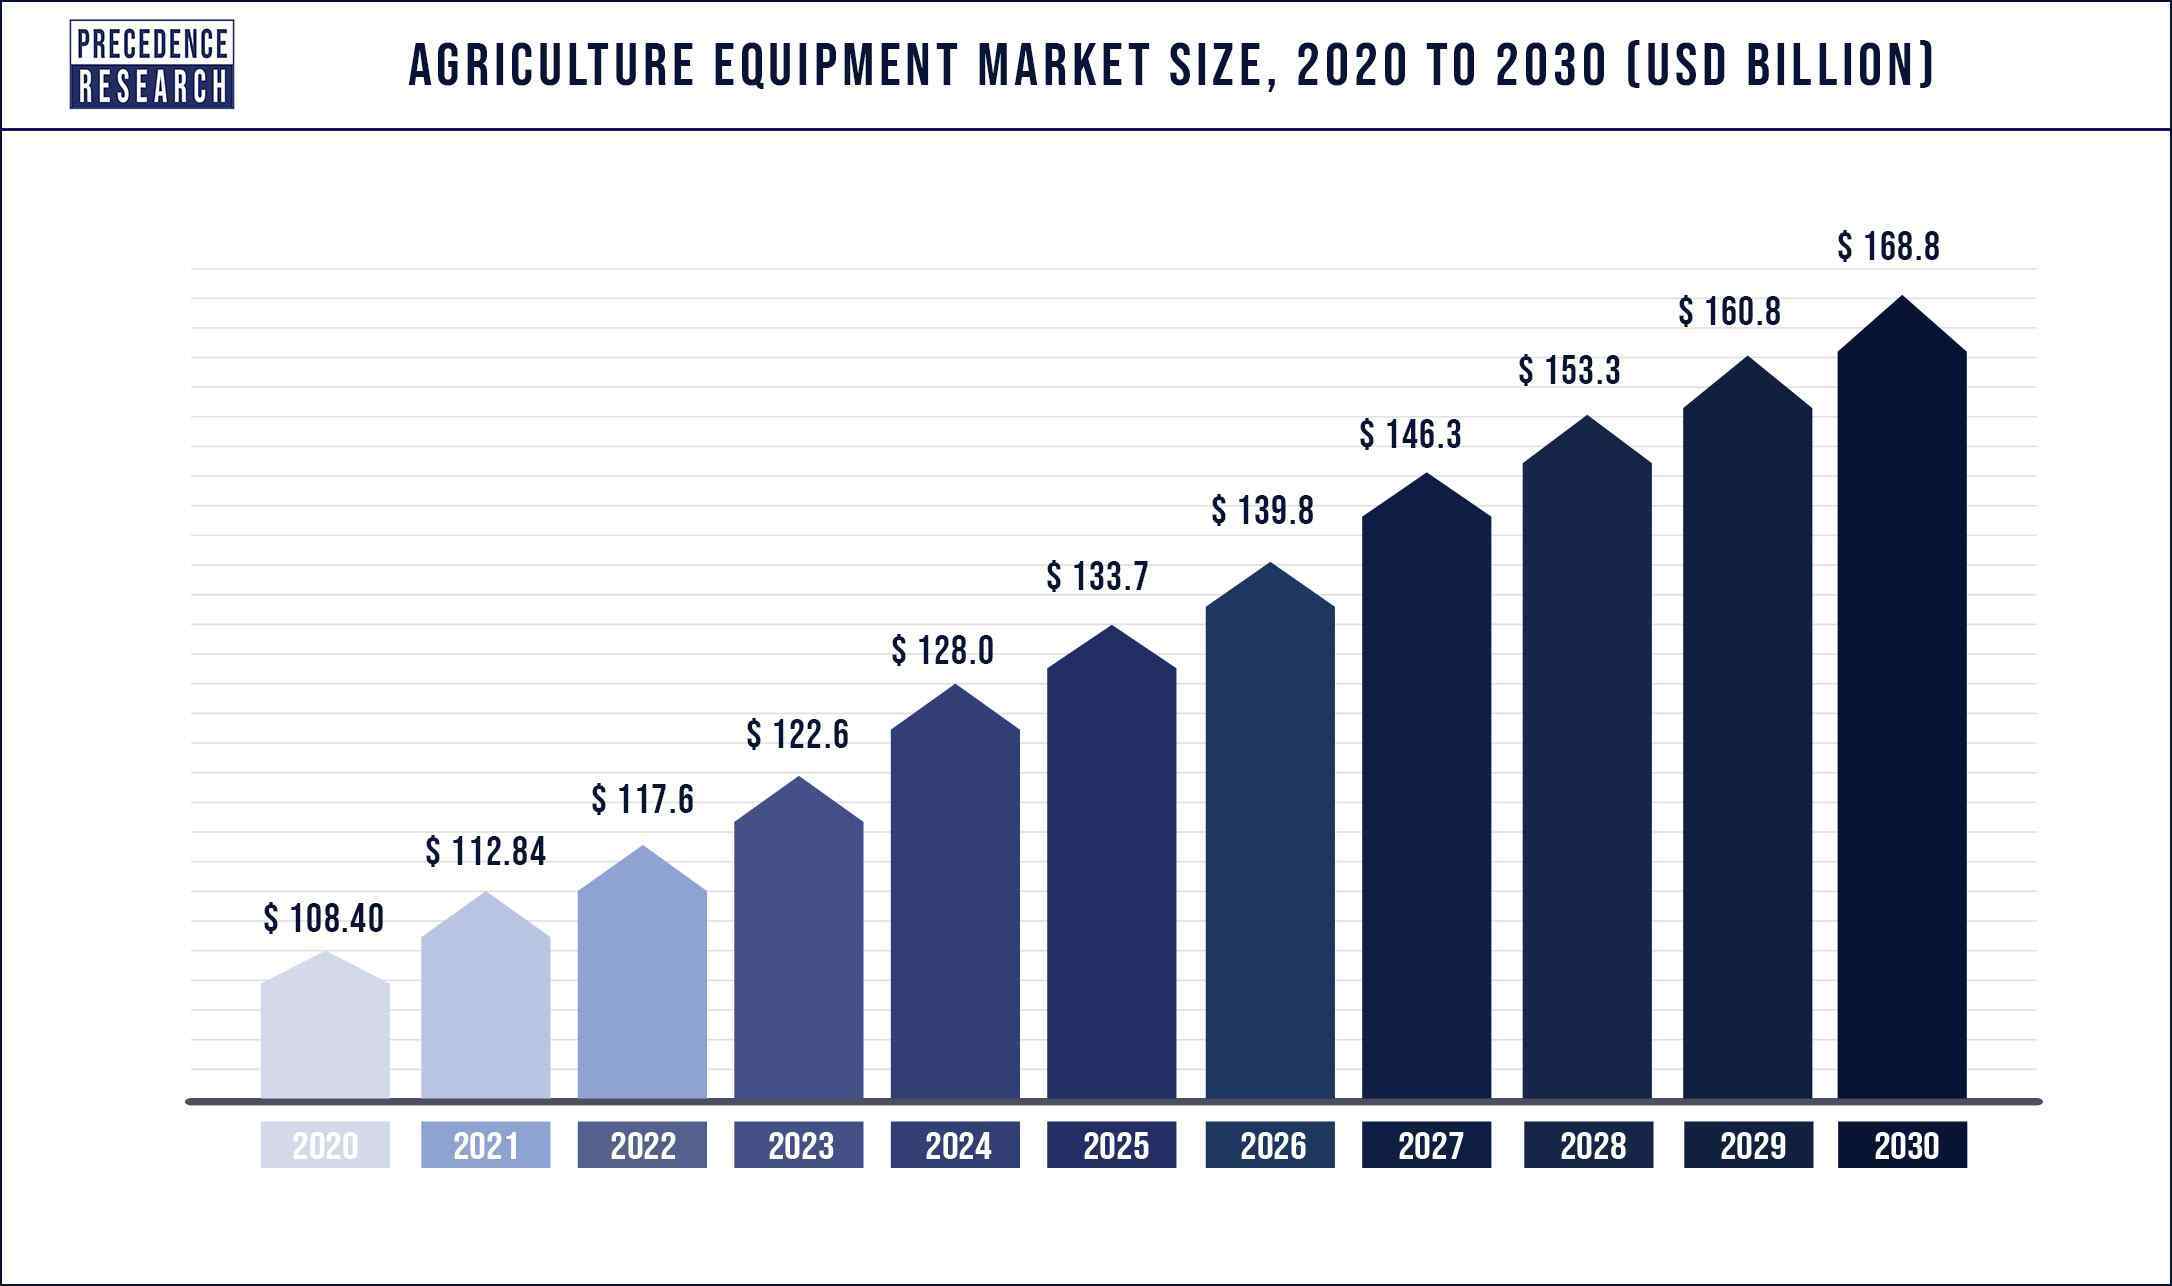 Agriculture Equipment Market Size 2020 to 2030